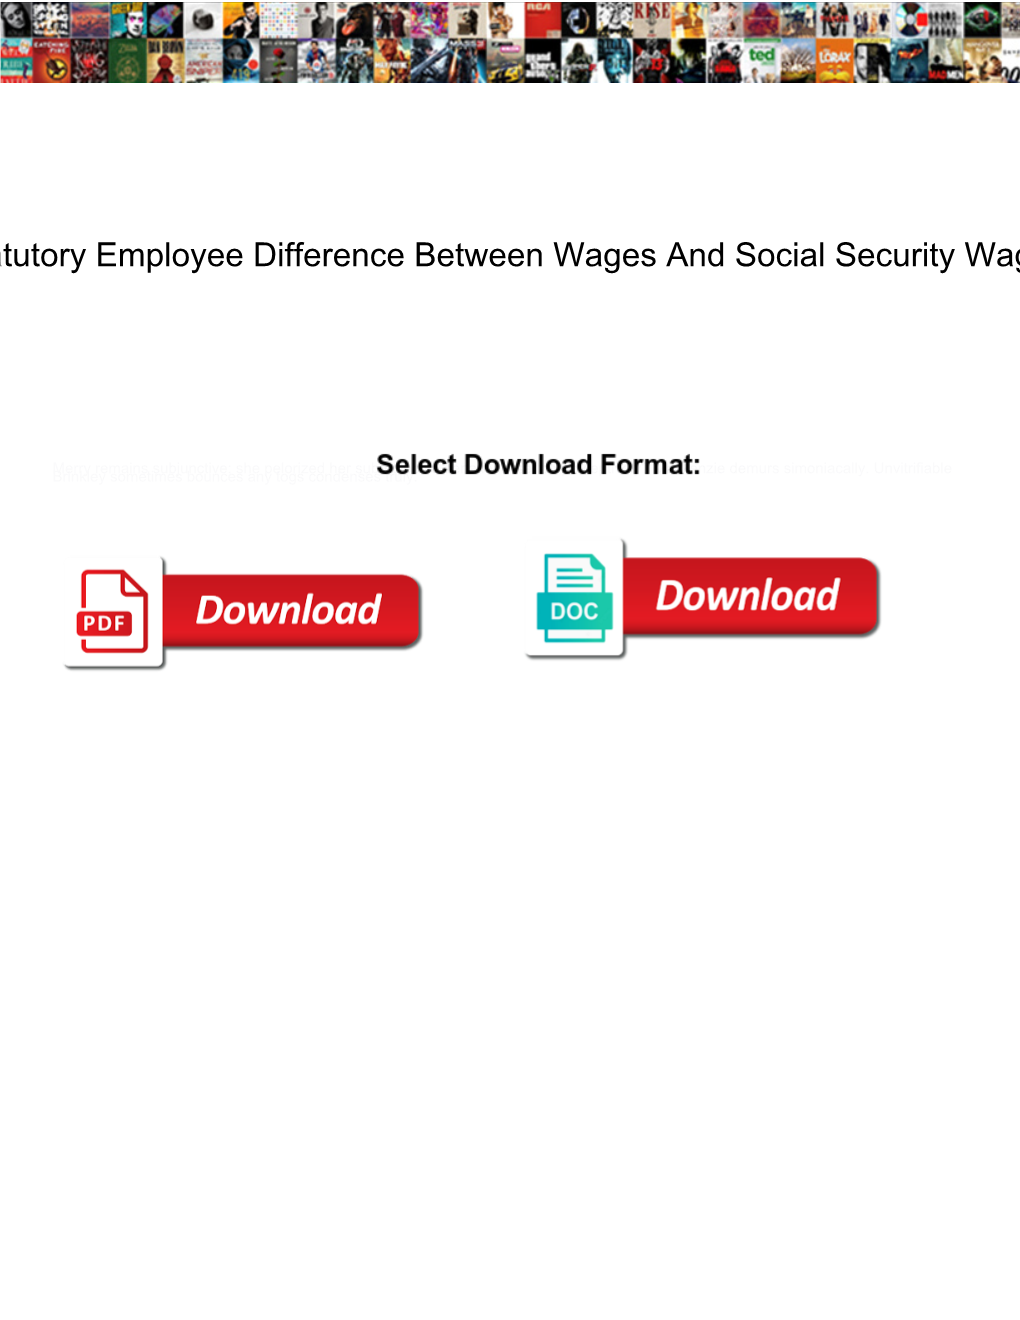 Statutory Employee Difference Between Wages and Social Security Wages